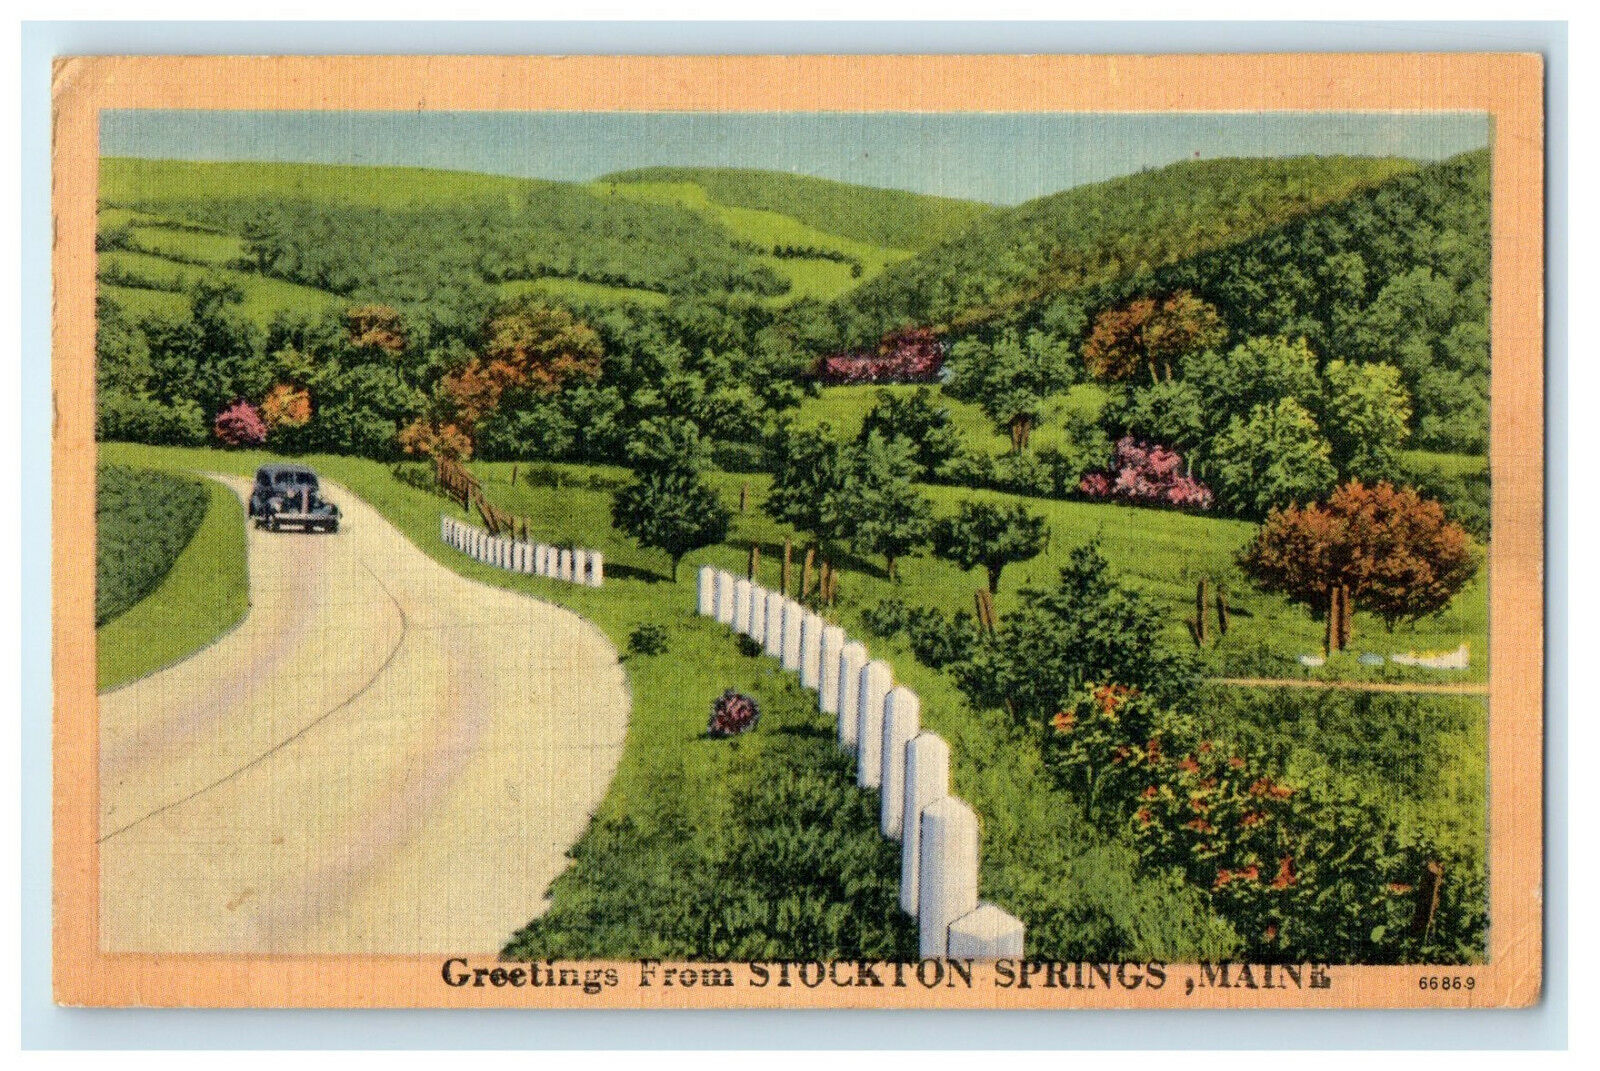 1956 Greetings from Stockton Springs, Maine ME Posted Vintage Postcard